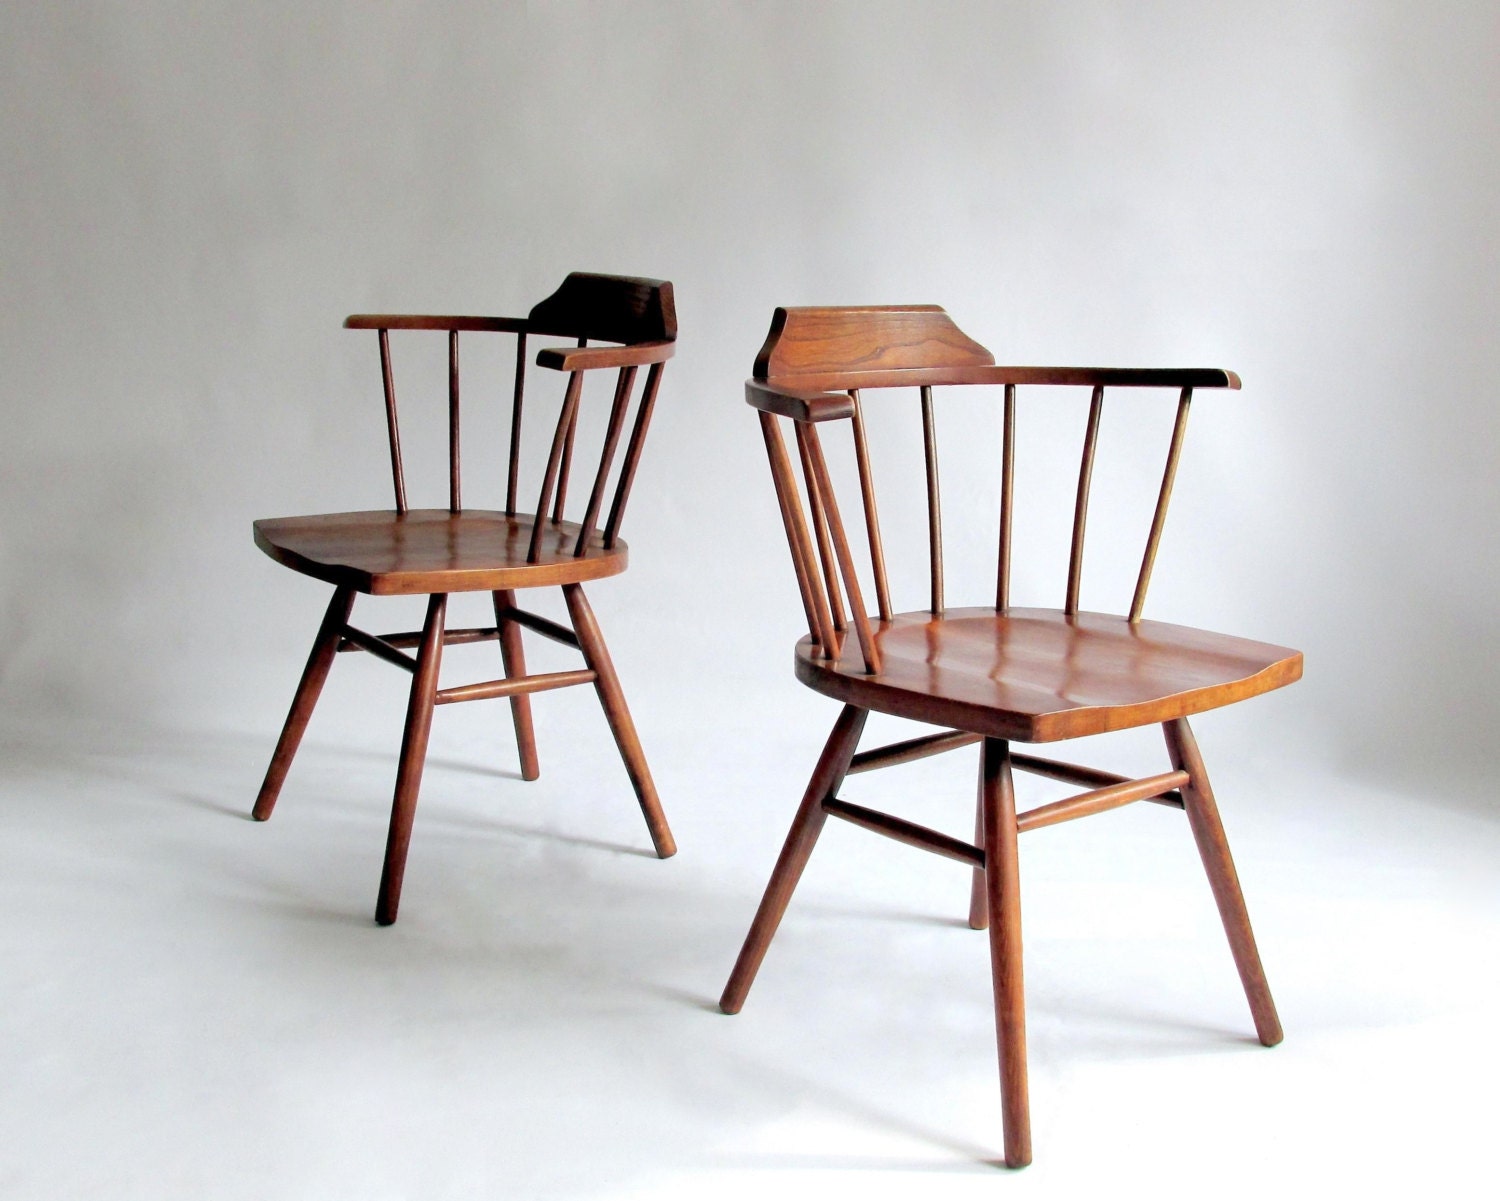 Pair of Mid Century Windsor Chairs in the style of George Nakashima, Paul McCobb. Captains Chairs. - owlsongvintage